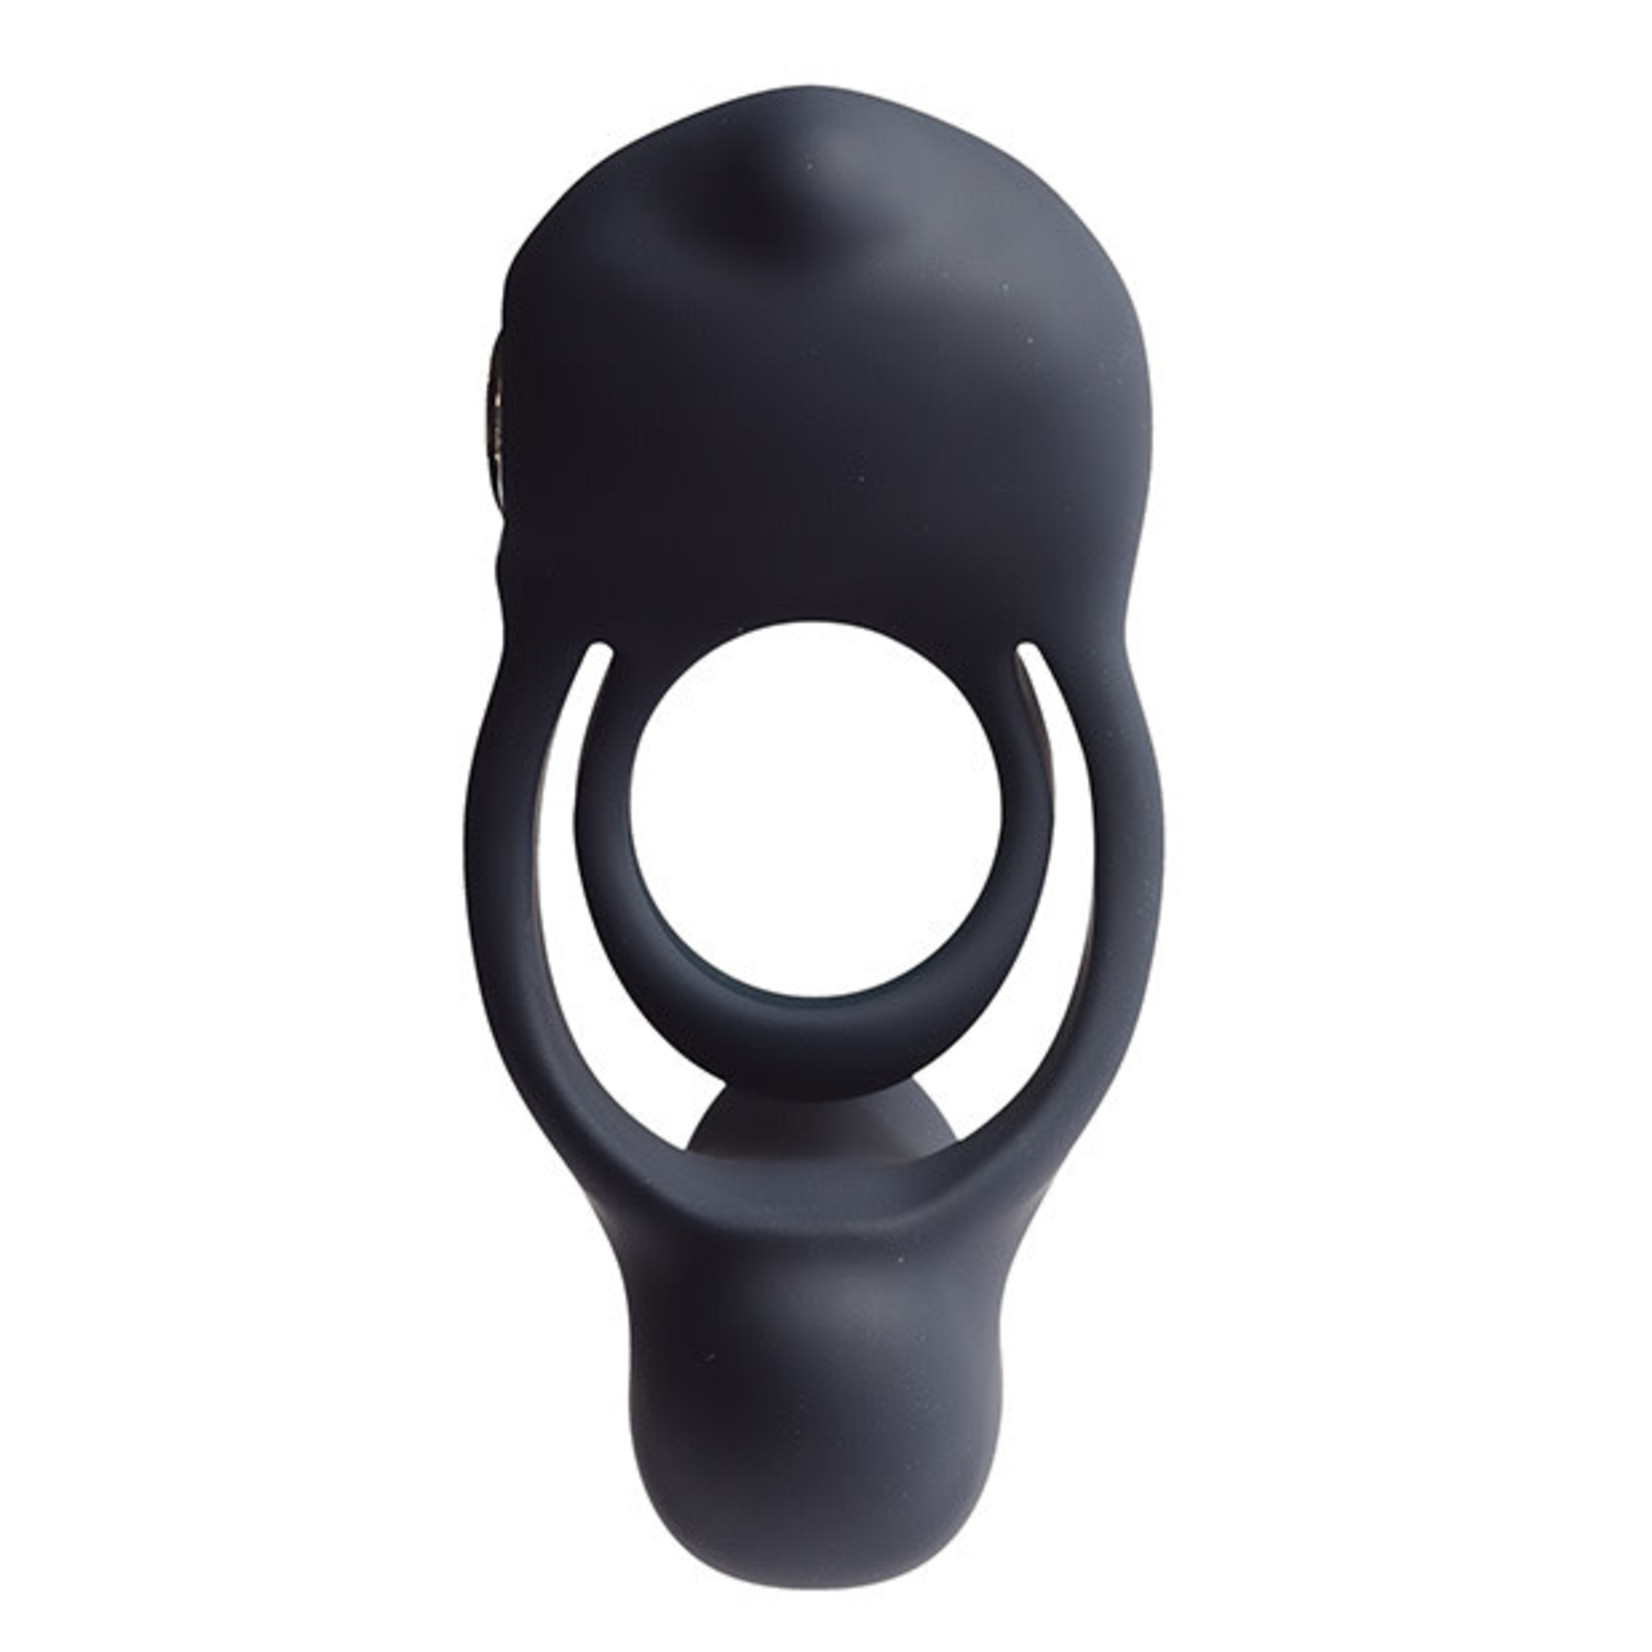 VEDO VEDO - ROCO RECHARGEABLE DUAL VIBRATING C-RING